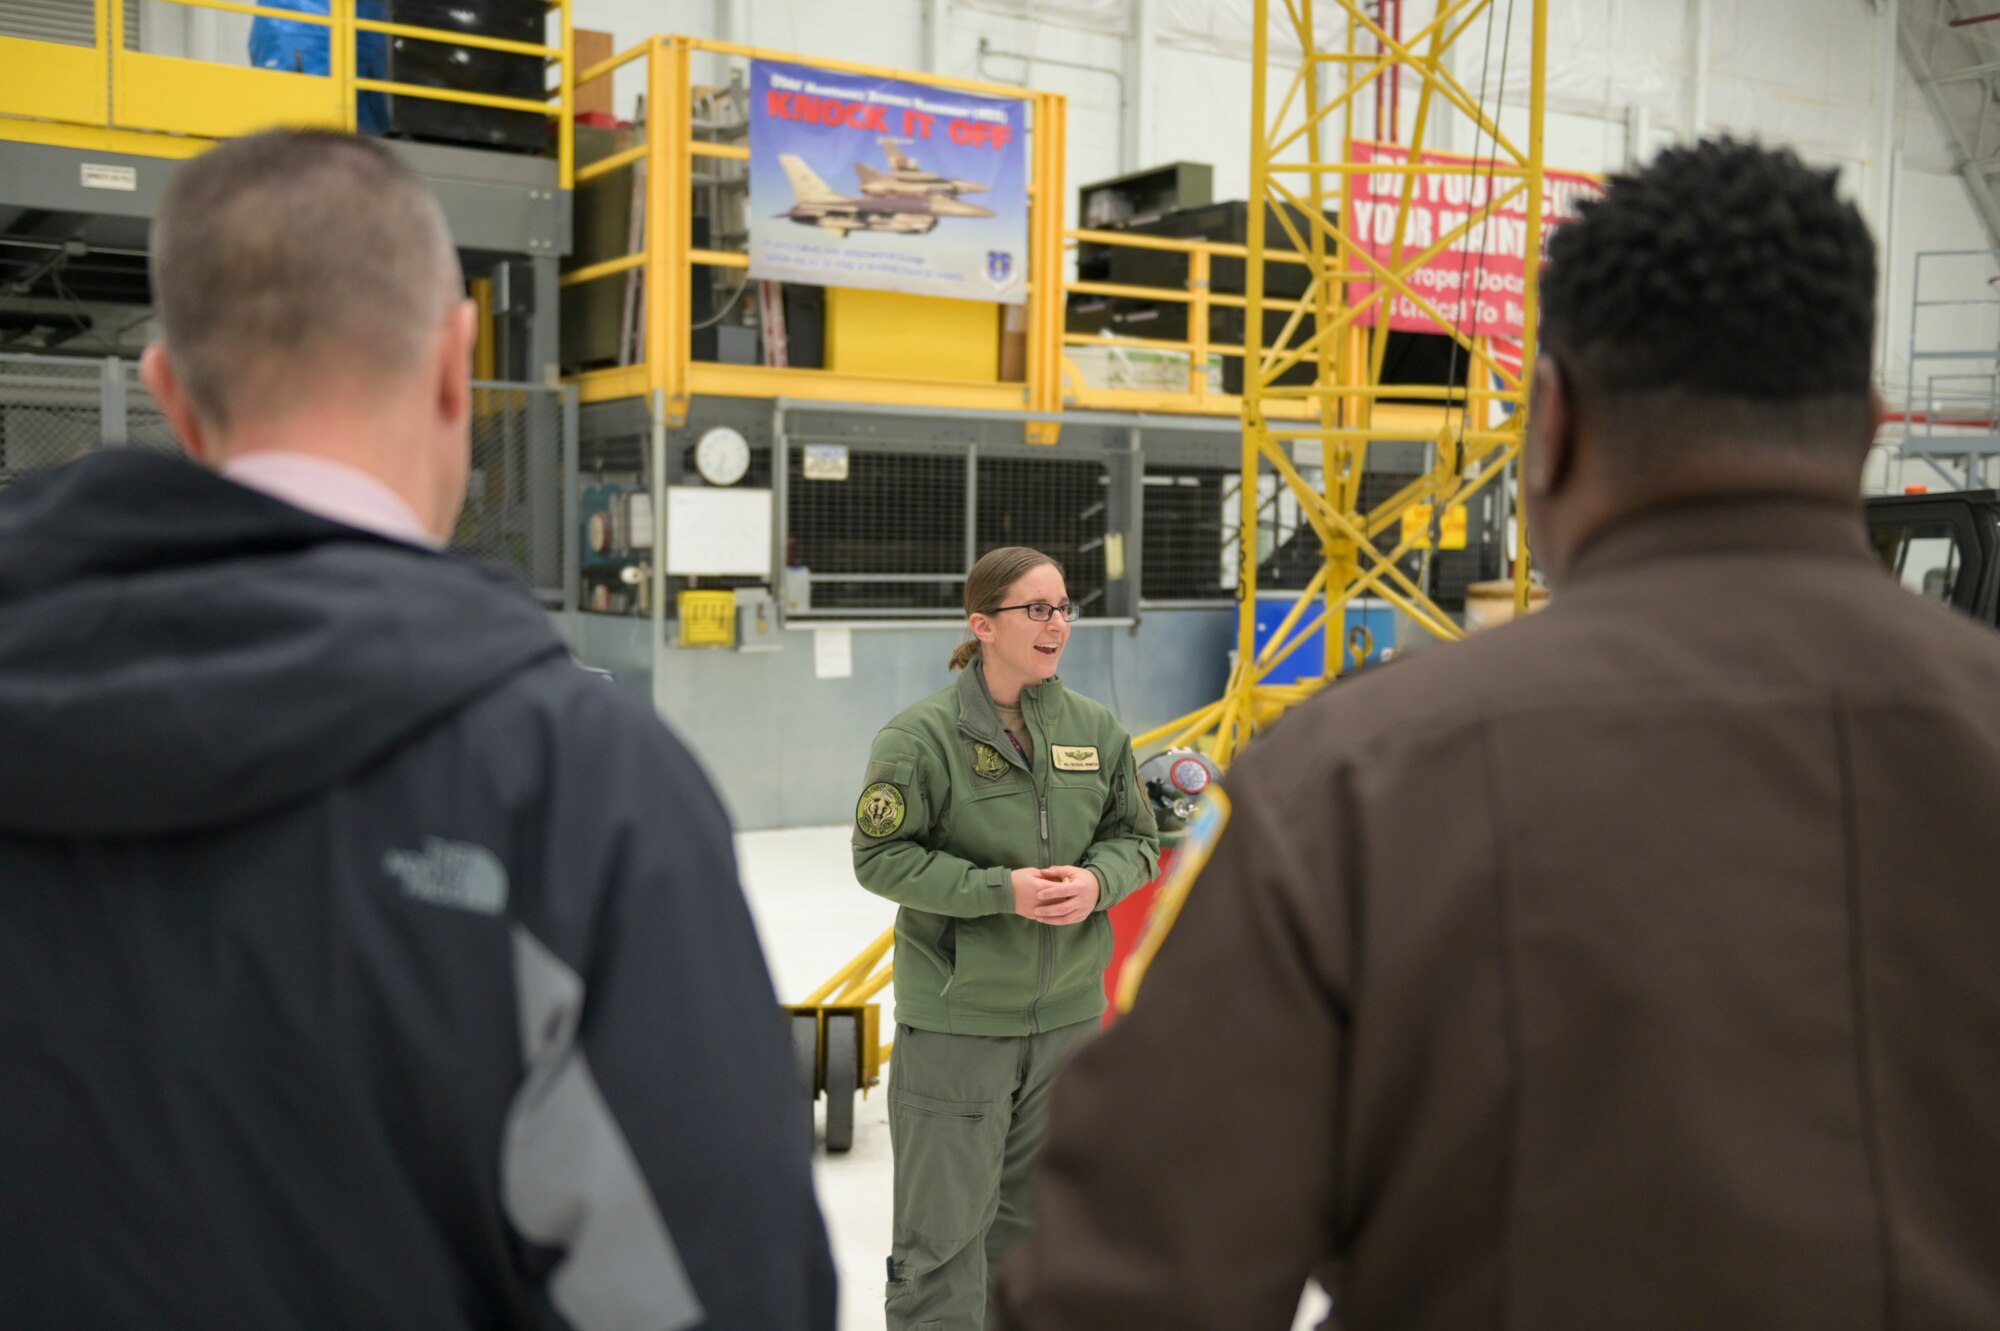 Local community leaders tour the 115th Fighter Wing, Madison, Wisconsin April 6, 2022 during an event commemorating their new role as Honorary Commanders. The Honorary Commander Program was developed to allow local community and business leaders and opportunity to gain insight into the fighter wing's mission and overall U.S. Air Force way of life. (U.S. Air National Guard photo by Staff Sgt. Cameron Lewis)